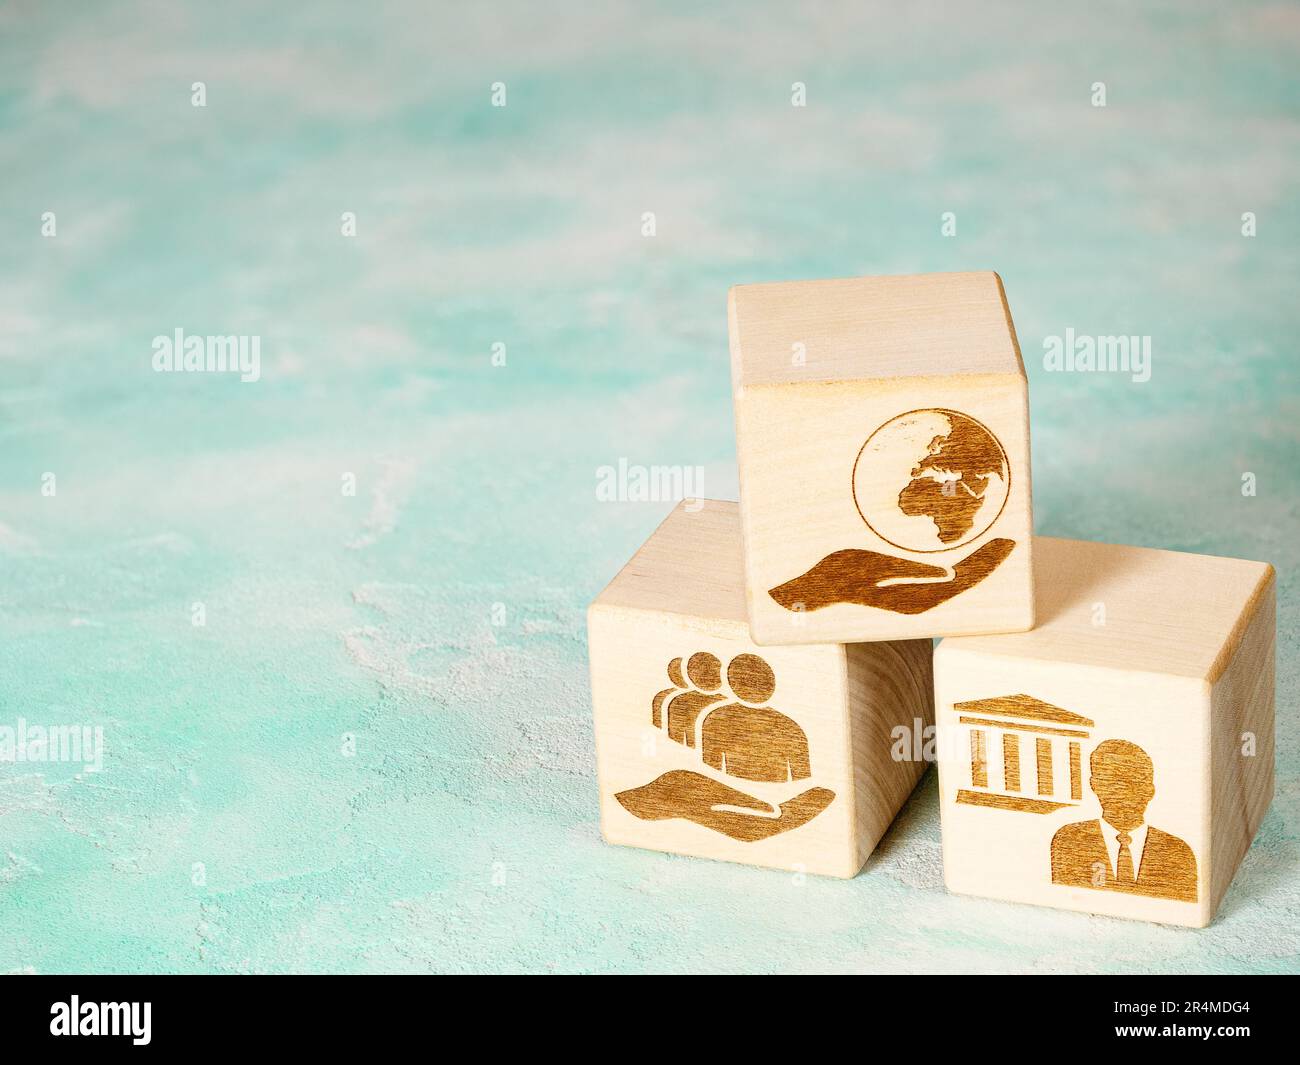 ESG symbols as a concept of environmental conservation, governance and social policy Stock Photo